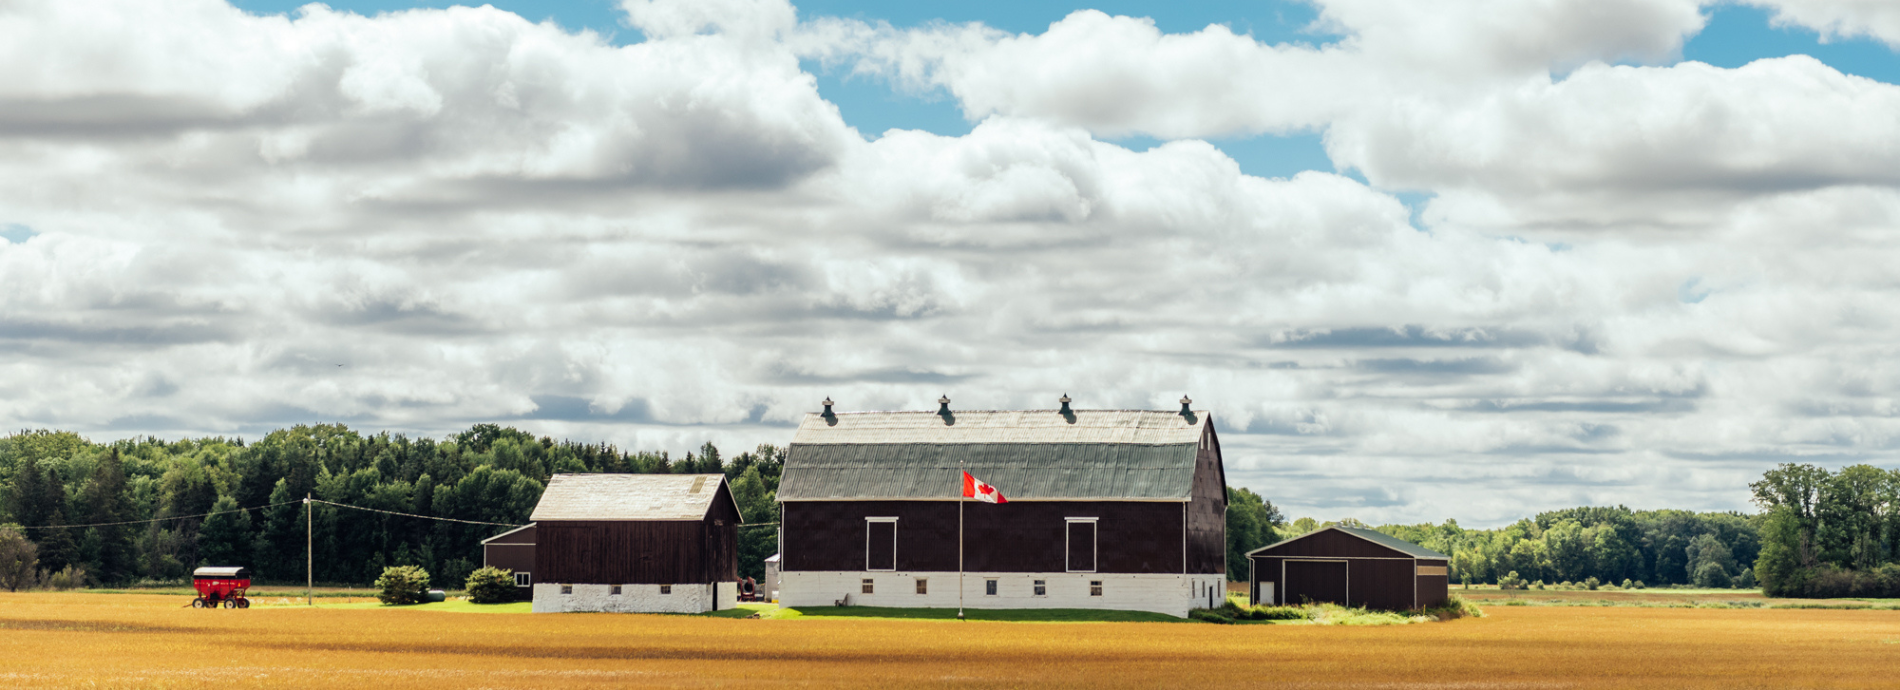 agricultural field and barn